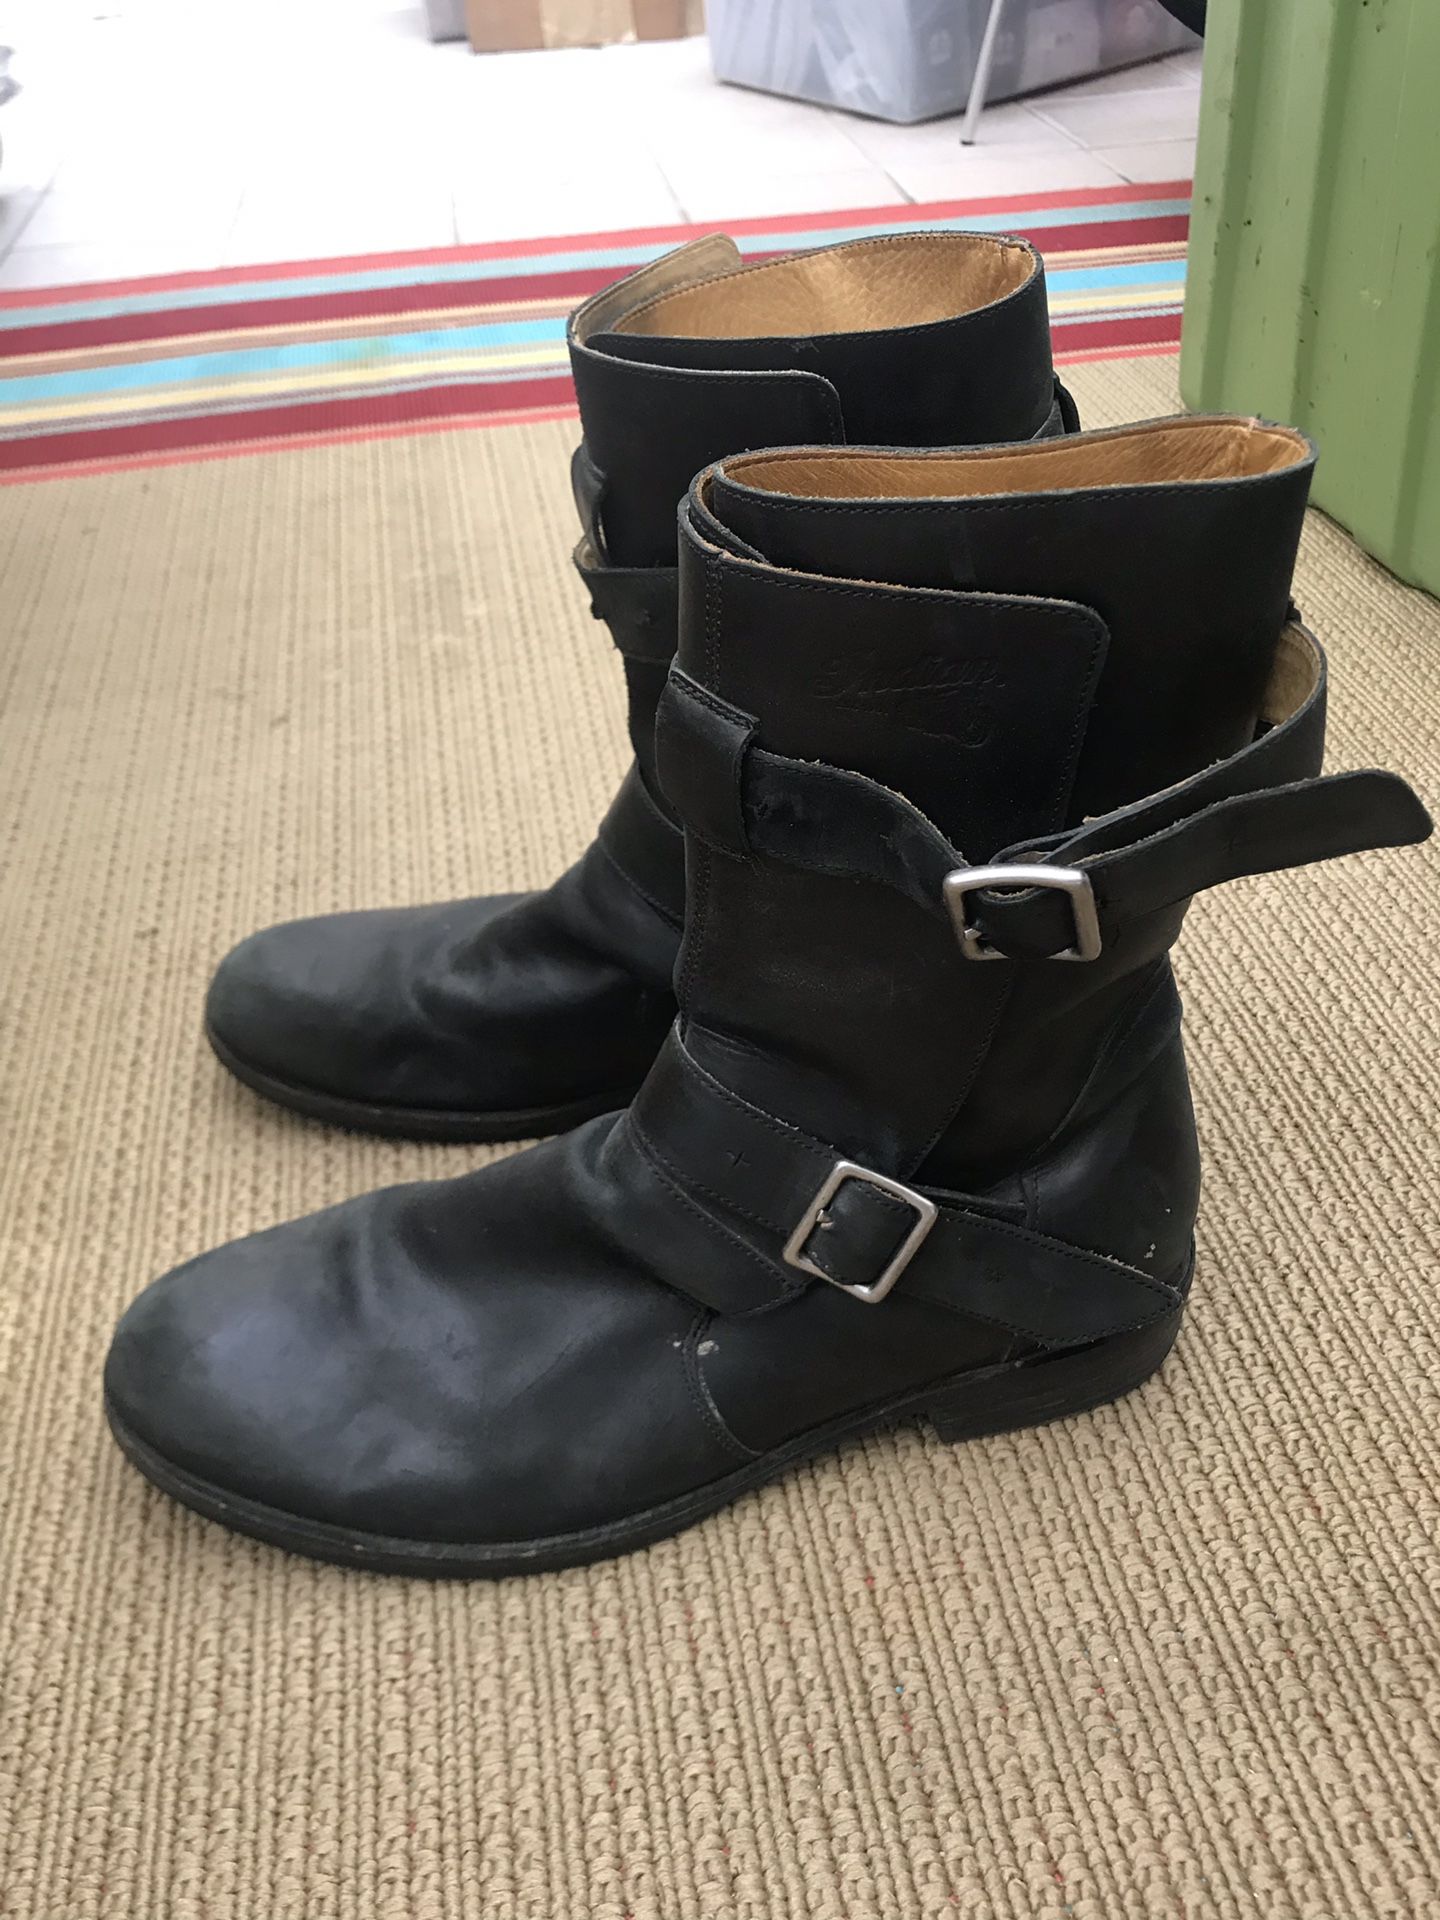 Indian Motorcycle Boots